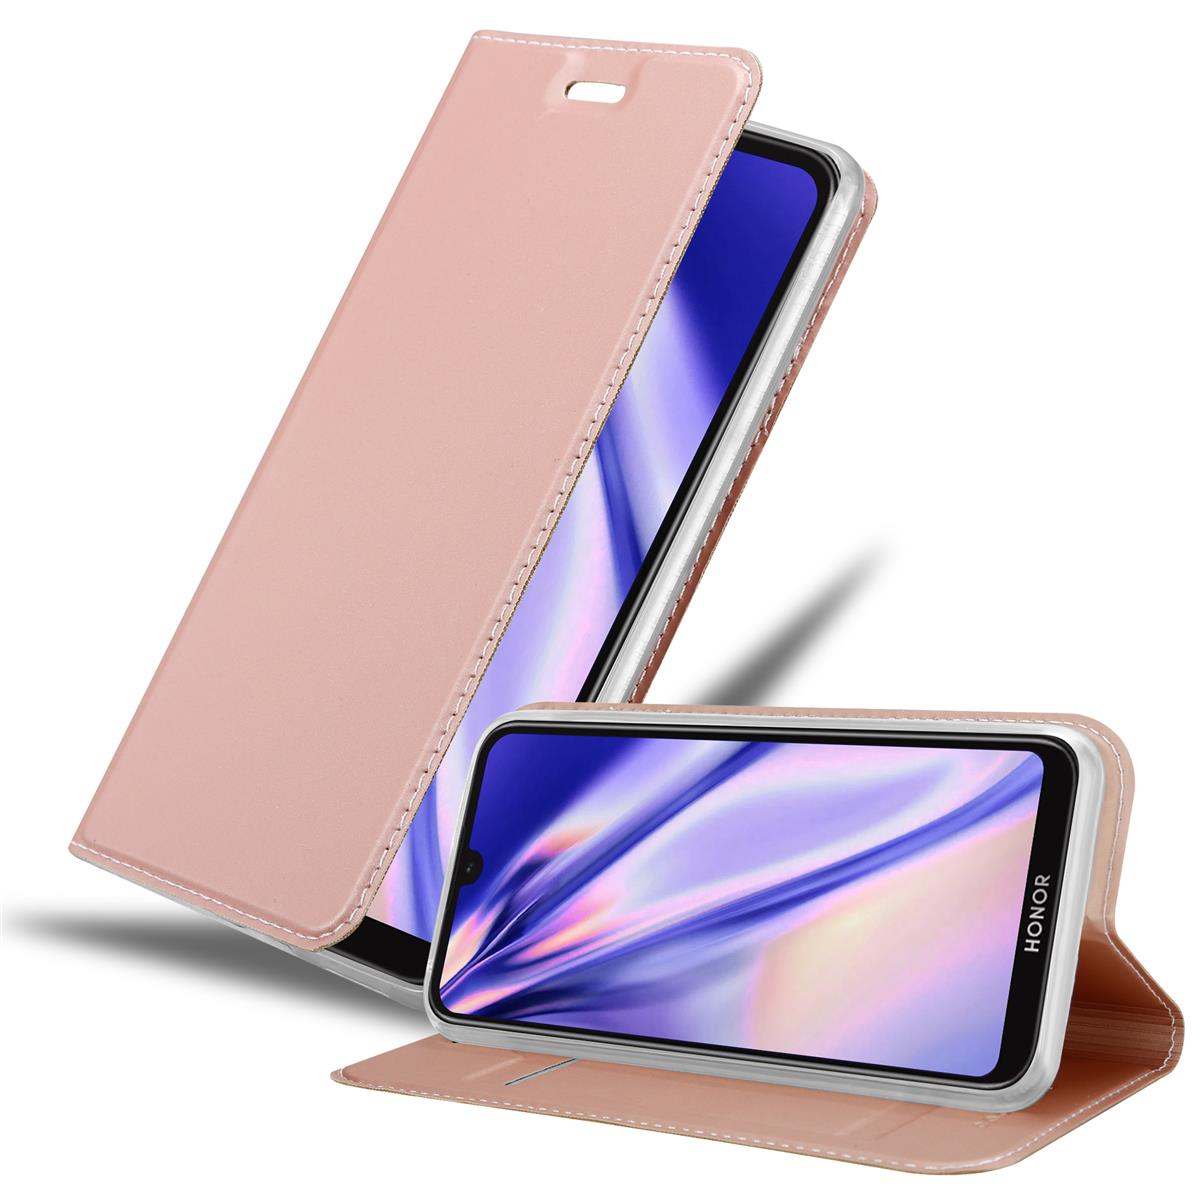 / Handyhülle Style, 8 2019 GOLD Y5 Honor 8S, CLASSY / Huawei, Play Bookcover, ROSÉ CADORABO Enjoy Classy Book